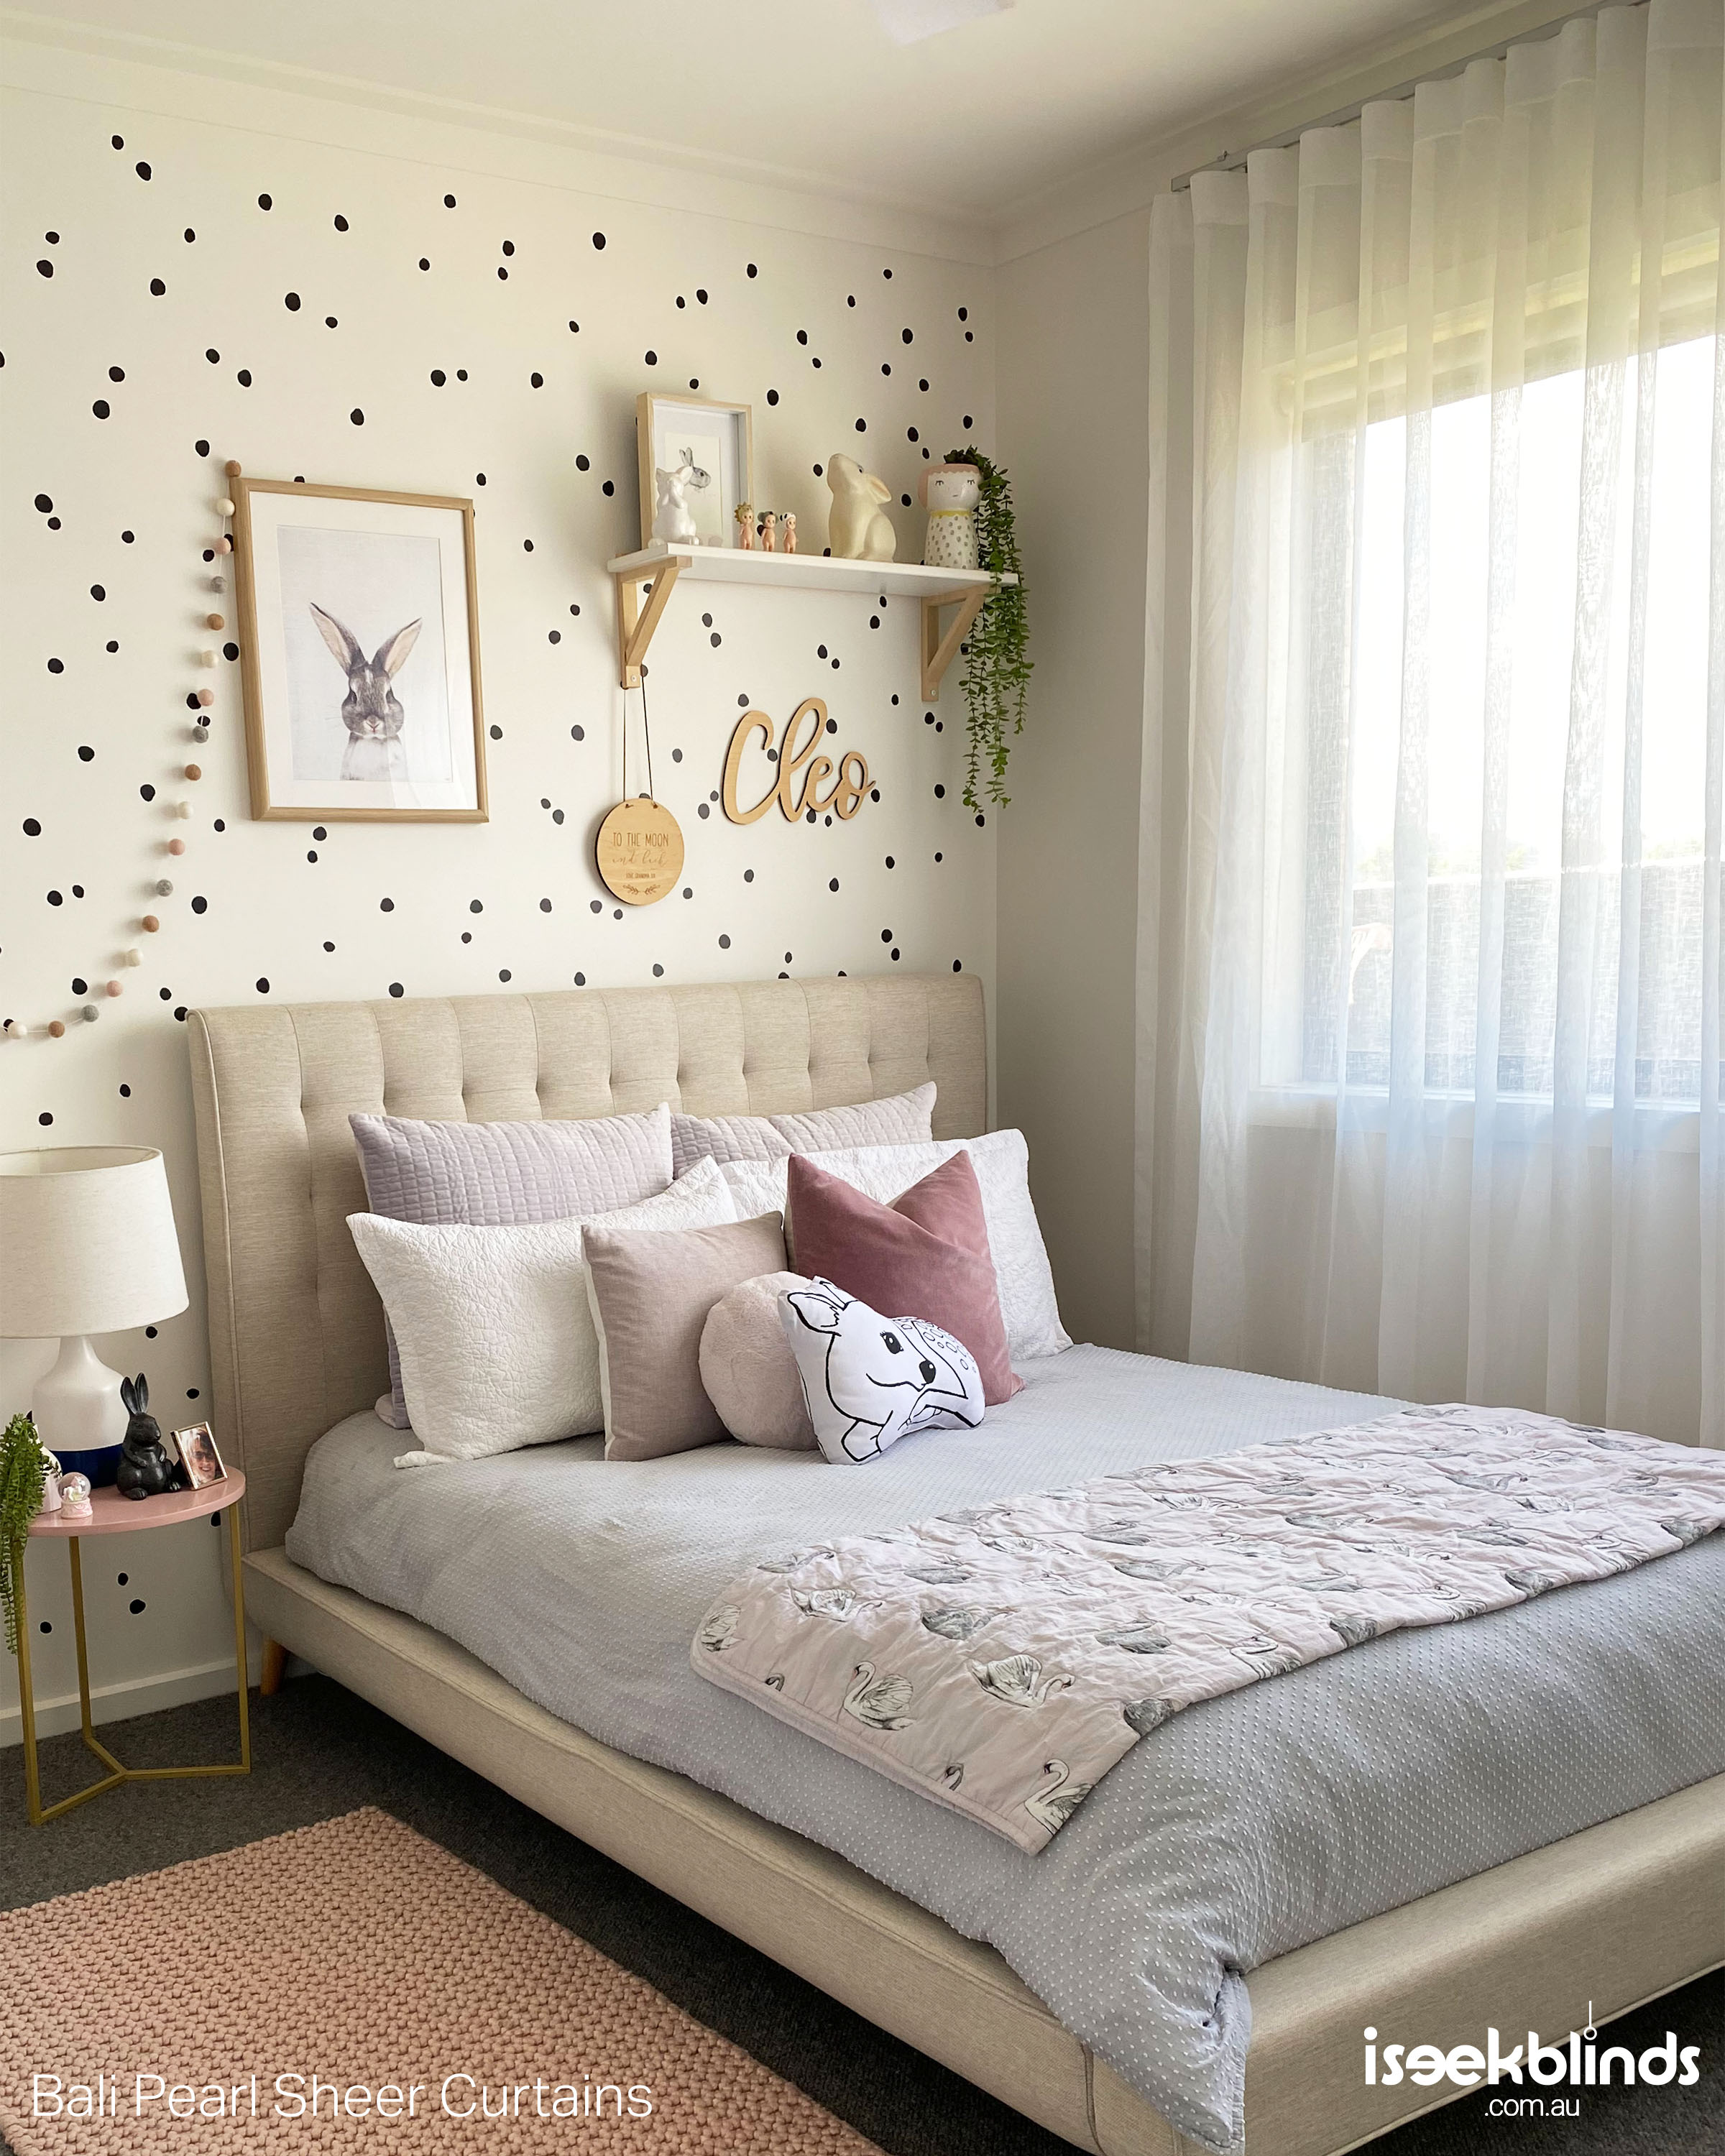 A beautifully styled young girls bedroom with white sheer curtains on the window. 